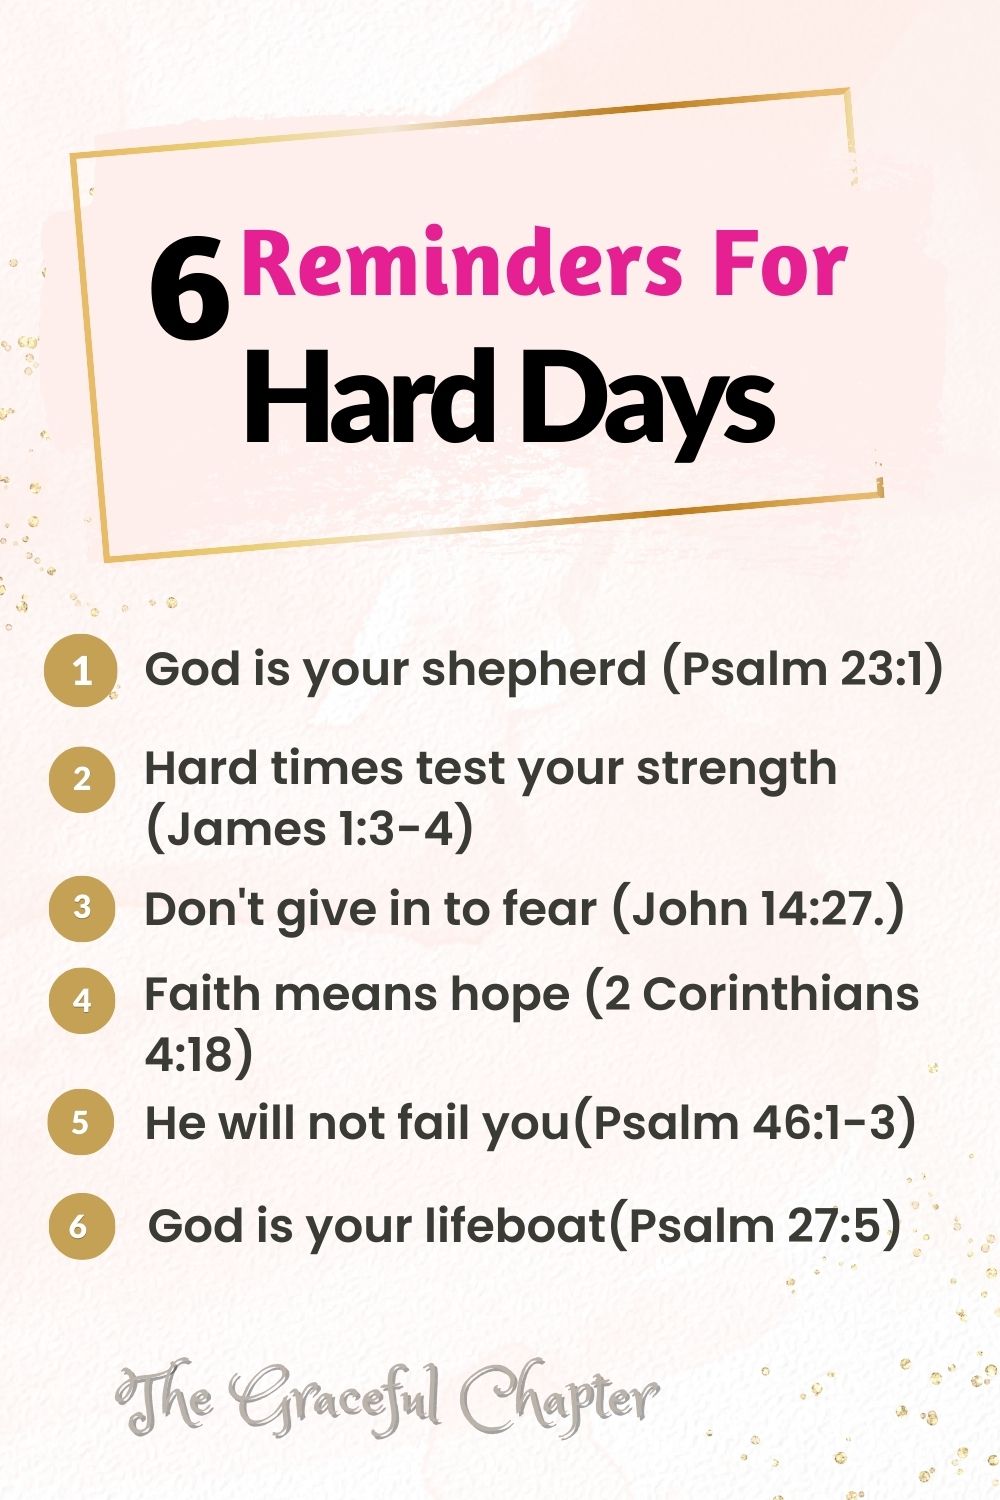 6 Reminders for hard days